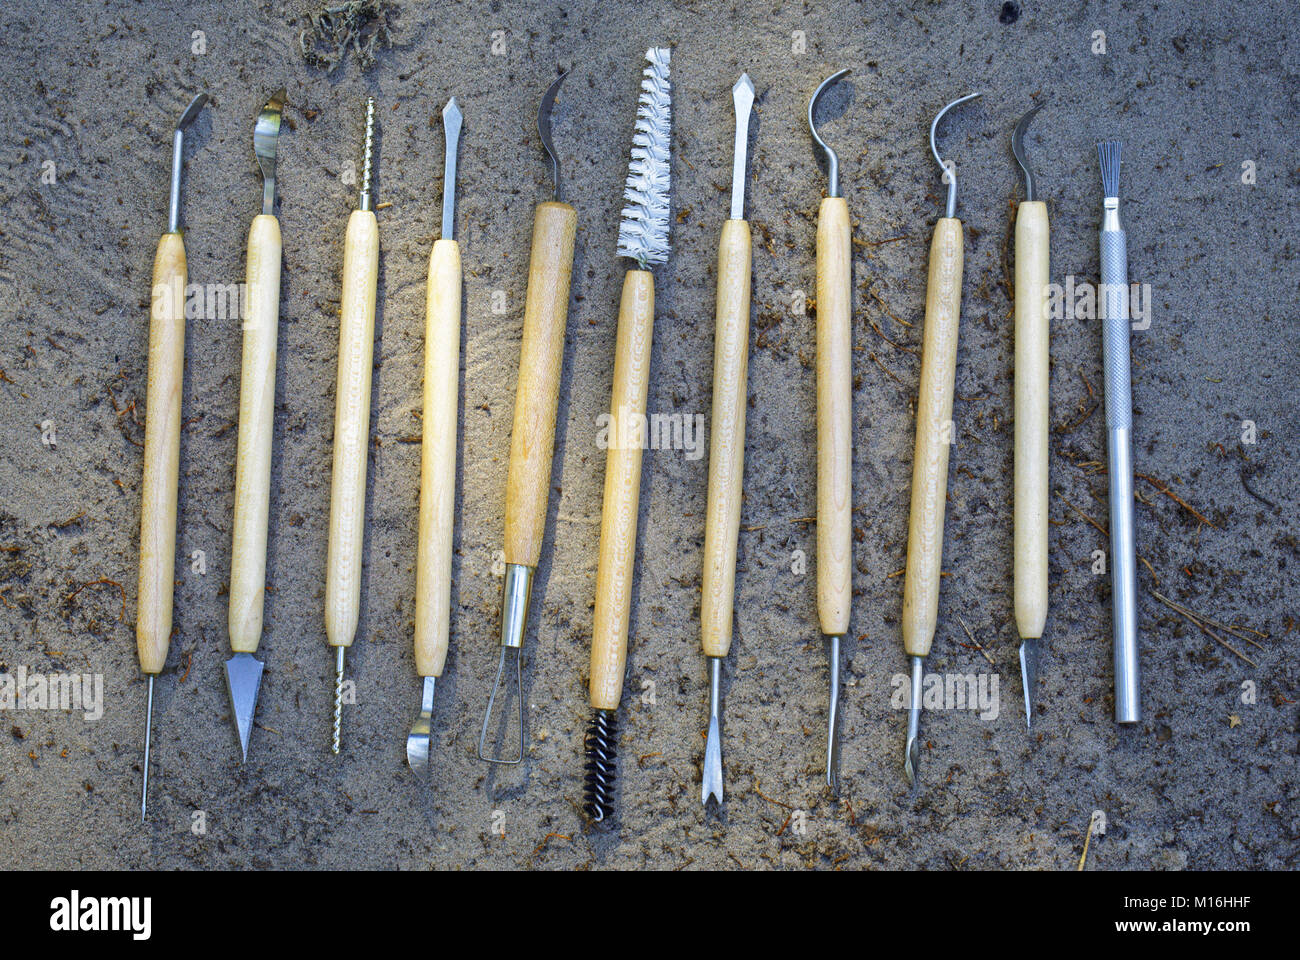 Different tools for qualitative cleaning of finds in archeology, paleontology and geology Stock Photo